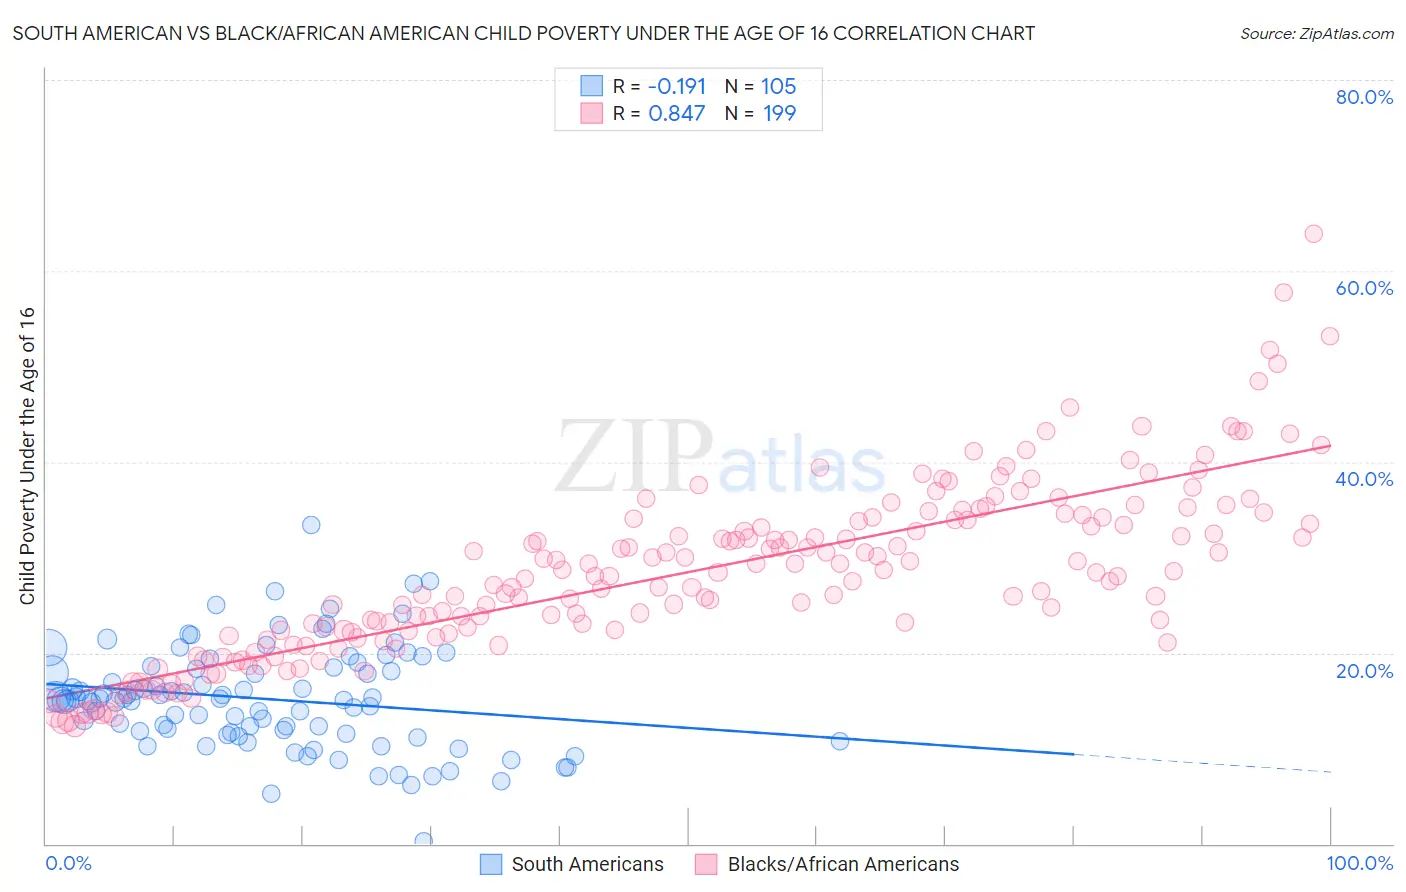 South American vs Black/African American Child Poverty Under the Age of 16